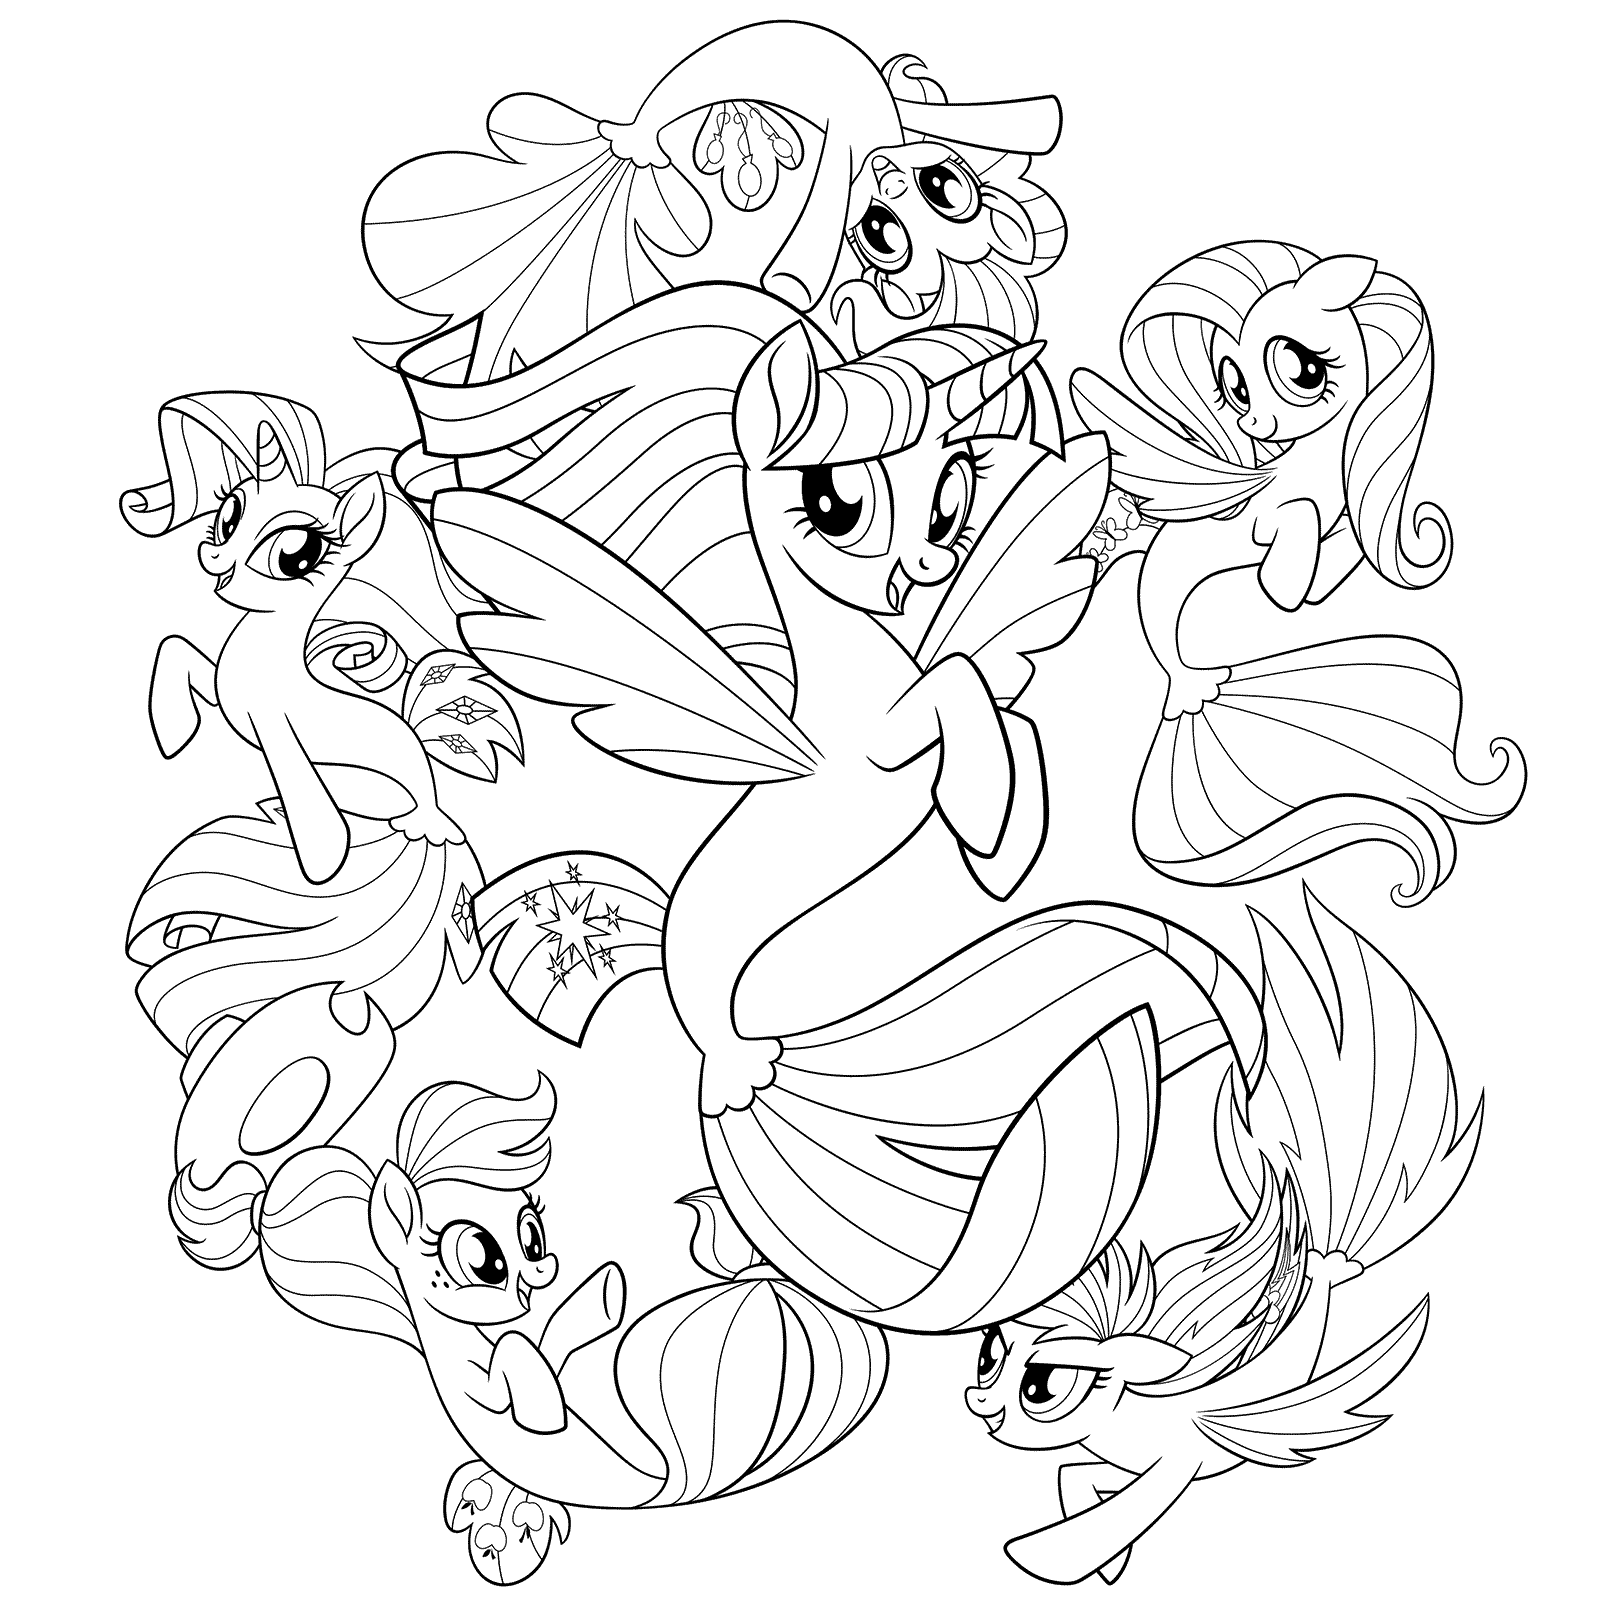 My Little Pony Friendship is Magic Coloring Pages - Best Coloring Pages